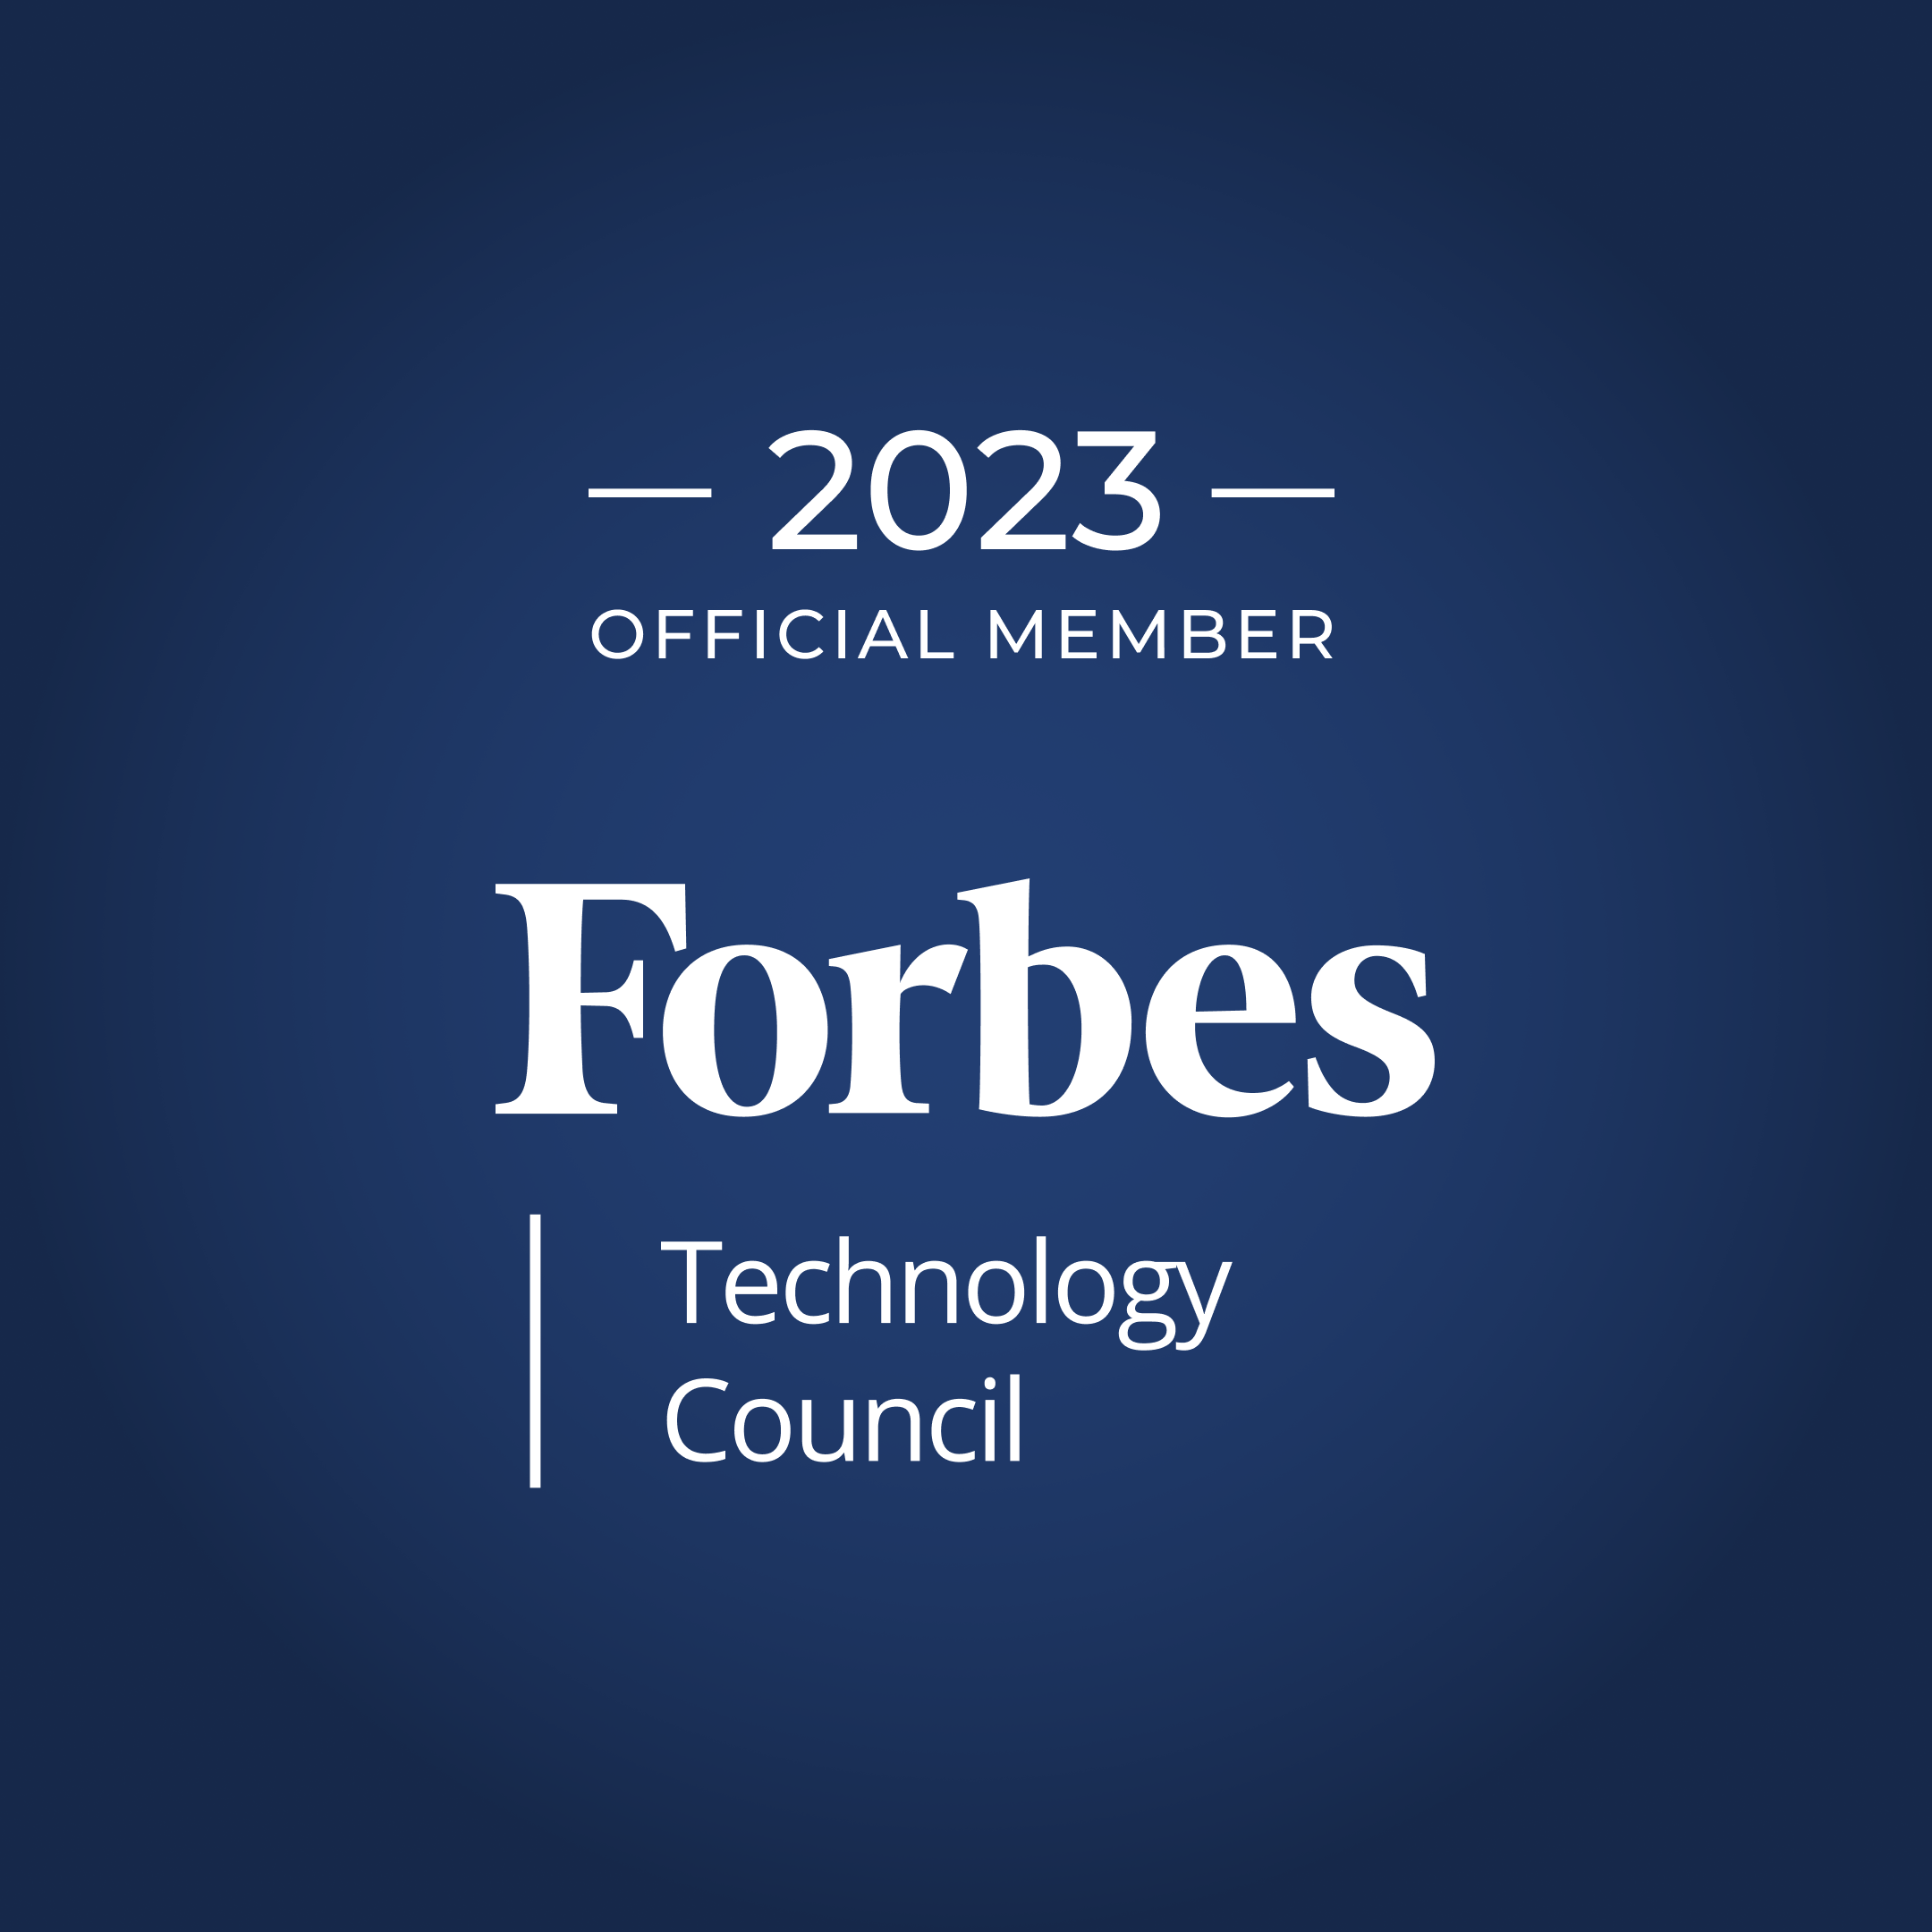 Forbes Technology Council - 2023 Official Member